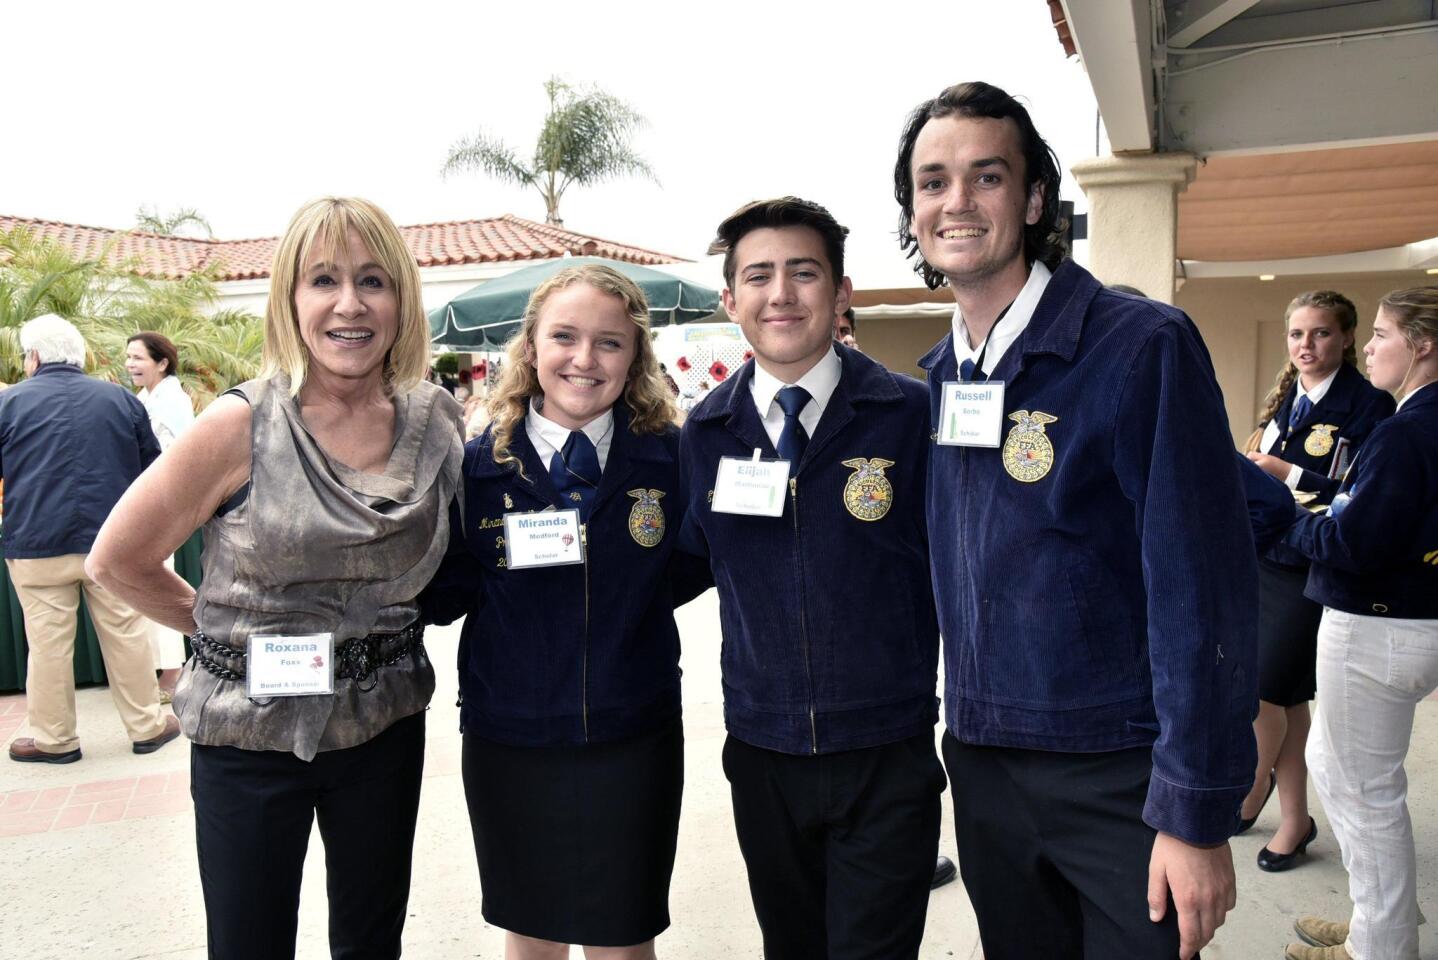 Gala co-chair/Silver sponsor/Board Chairman Roxana Foxx with scholarship recipients Miranda Medford, Elijah Martineau, and Russell Sorbo,who captured the highest honors, a $5,000 FFA Scholarship, plus the $5,000 Spanjian Family Scholarship, awarded to the single most outstanding applicant